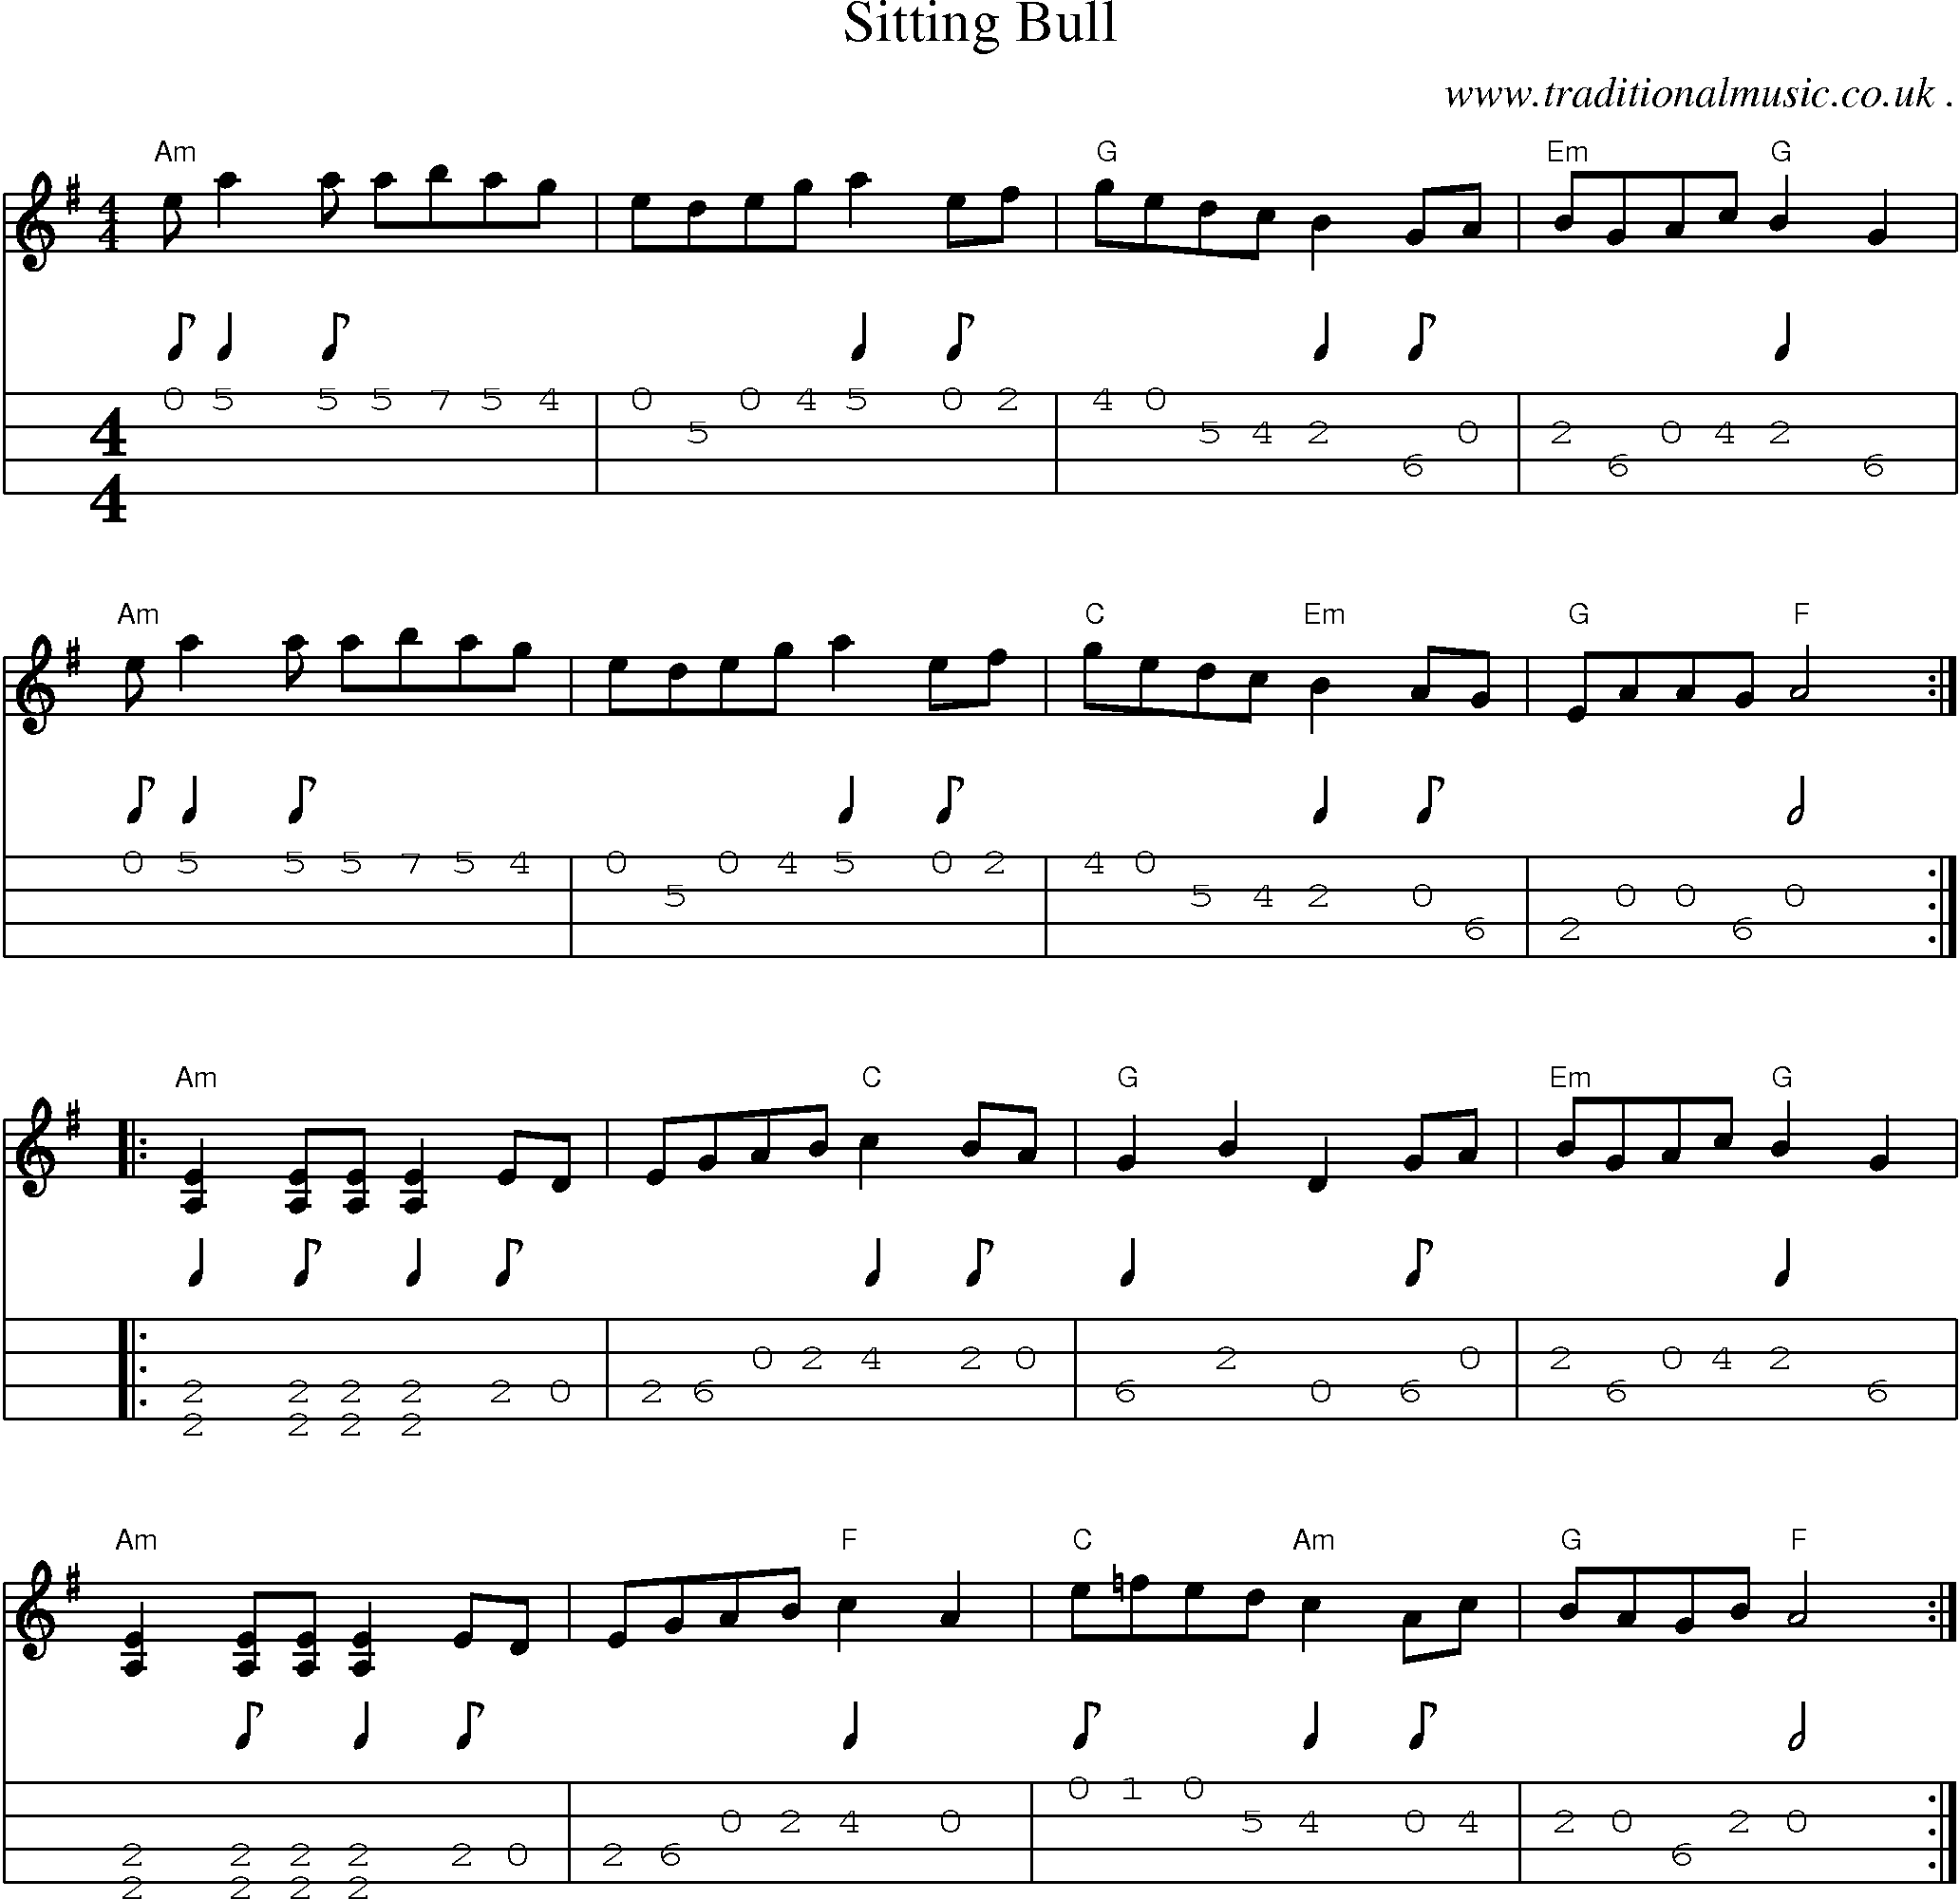 Music Score and Guitar Tabs for Sitting Bull